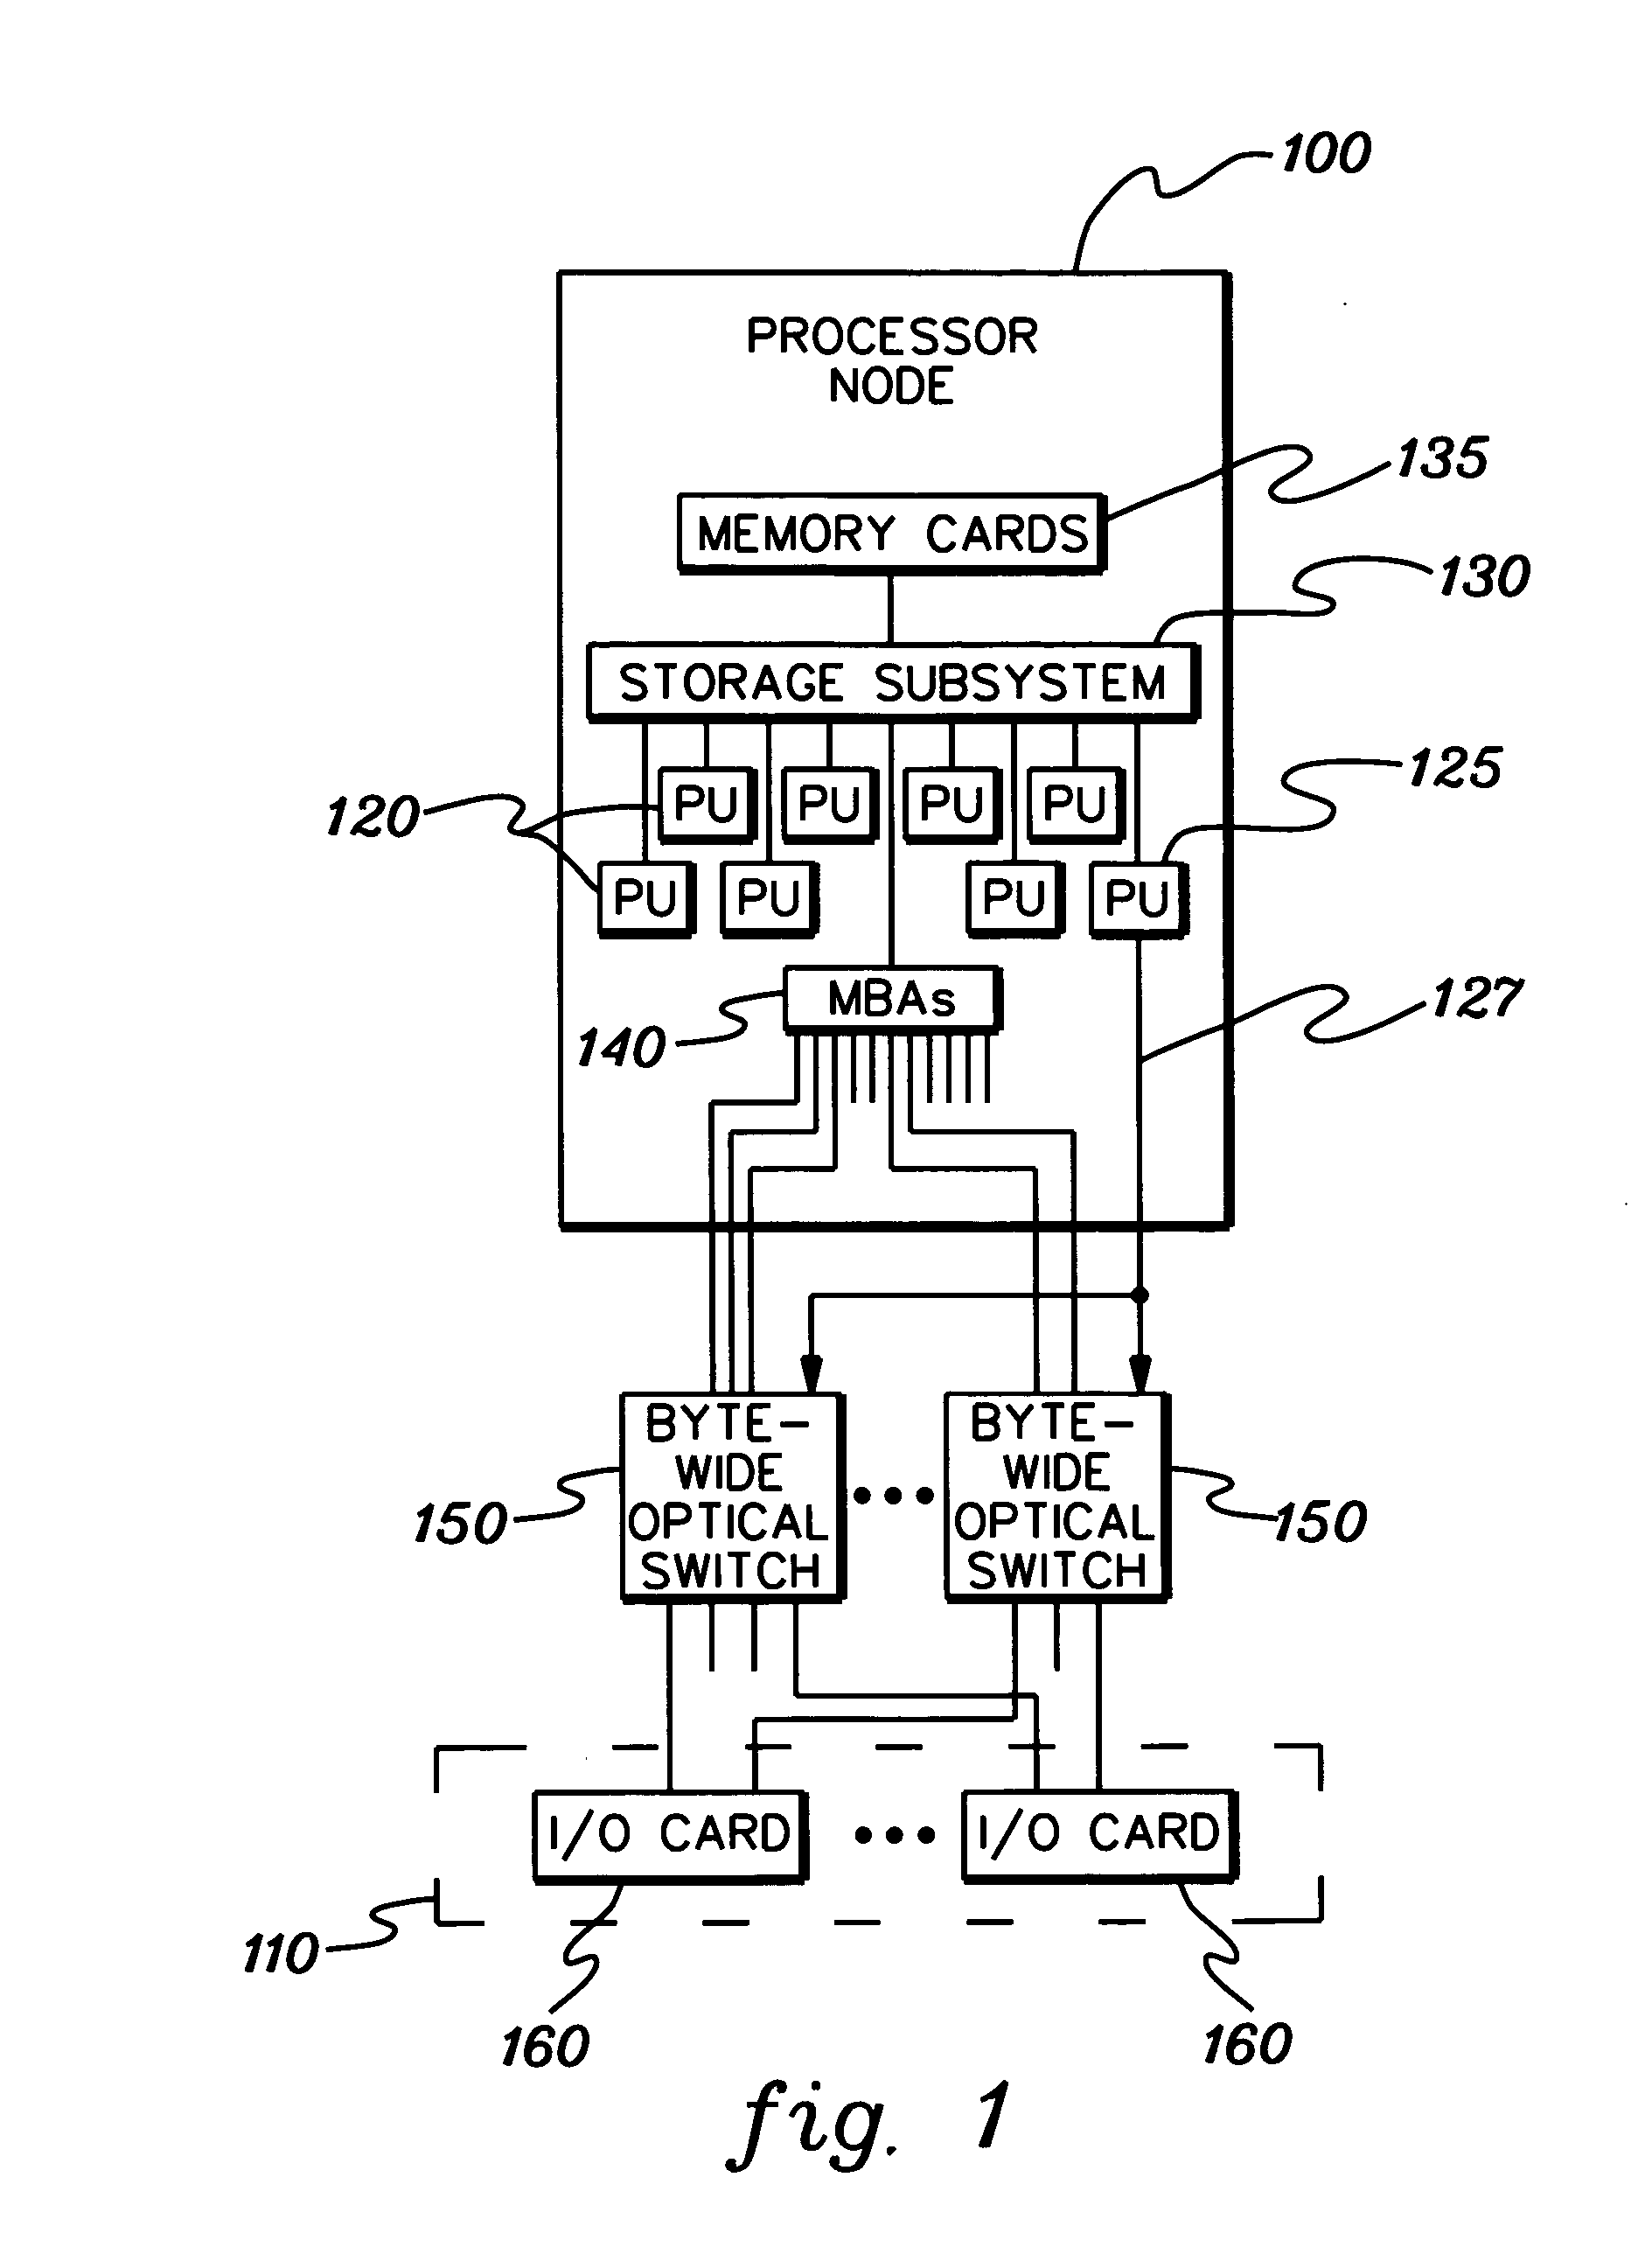 Byte-wide optical backplane switch and switching method